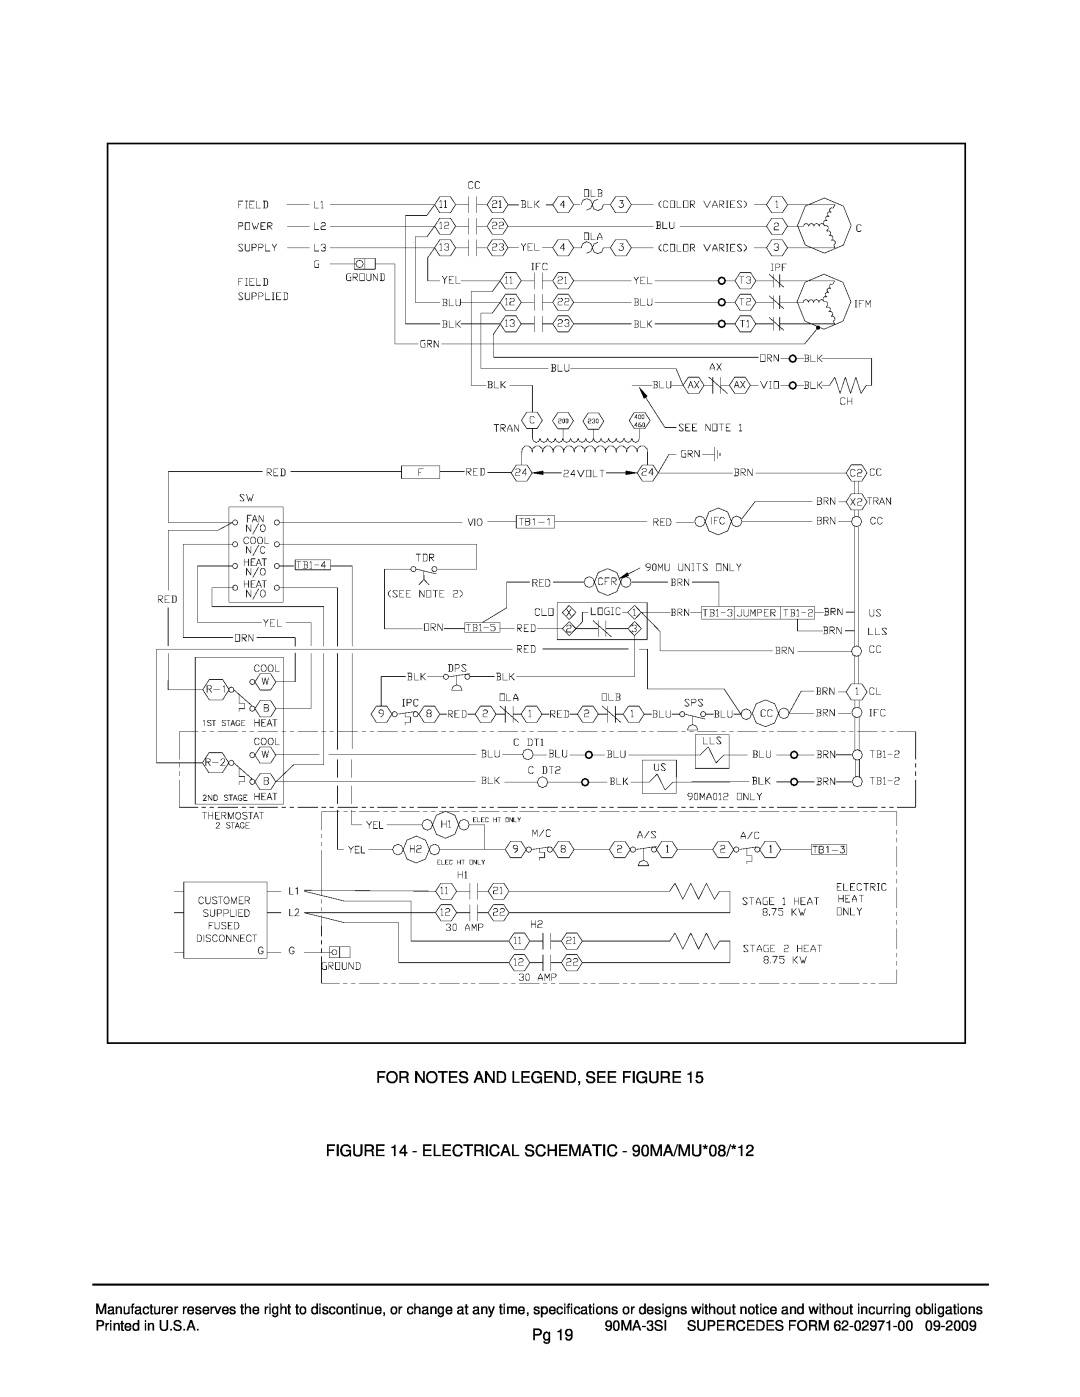 Carrier 90MU For Notes And Legend, See Figure, ELECTRICAL SCHEMATIC - 90MA/MU*08/*12, 90MA-3SISUPERCEDES FORM 